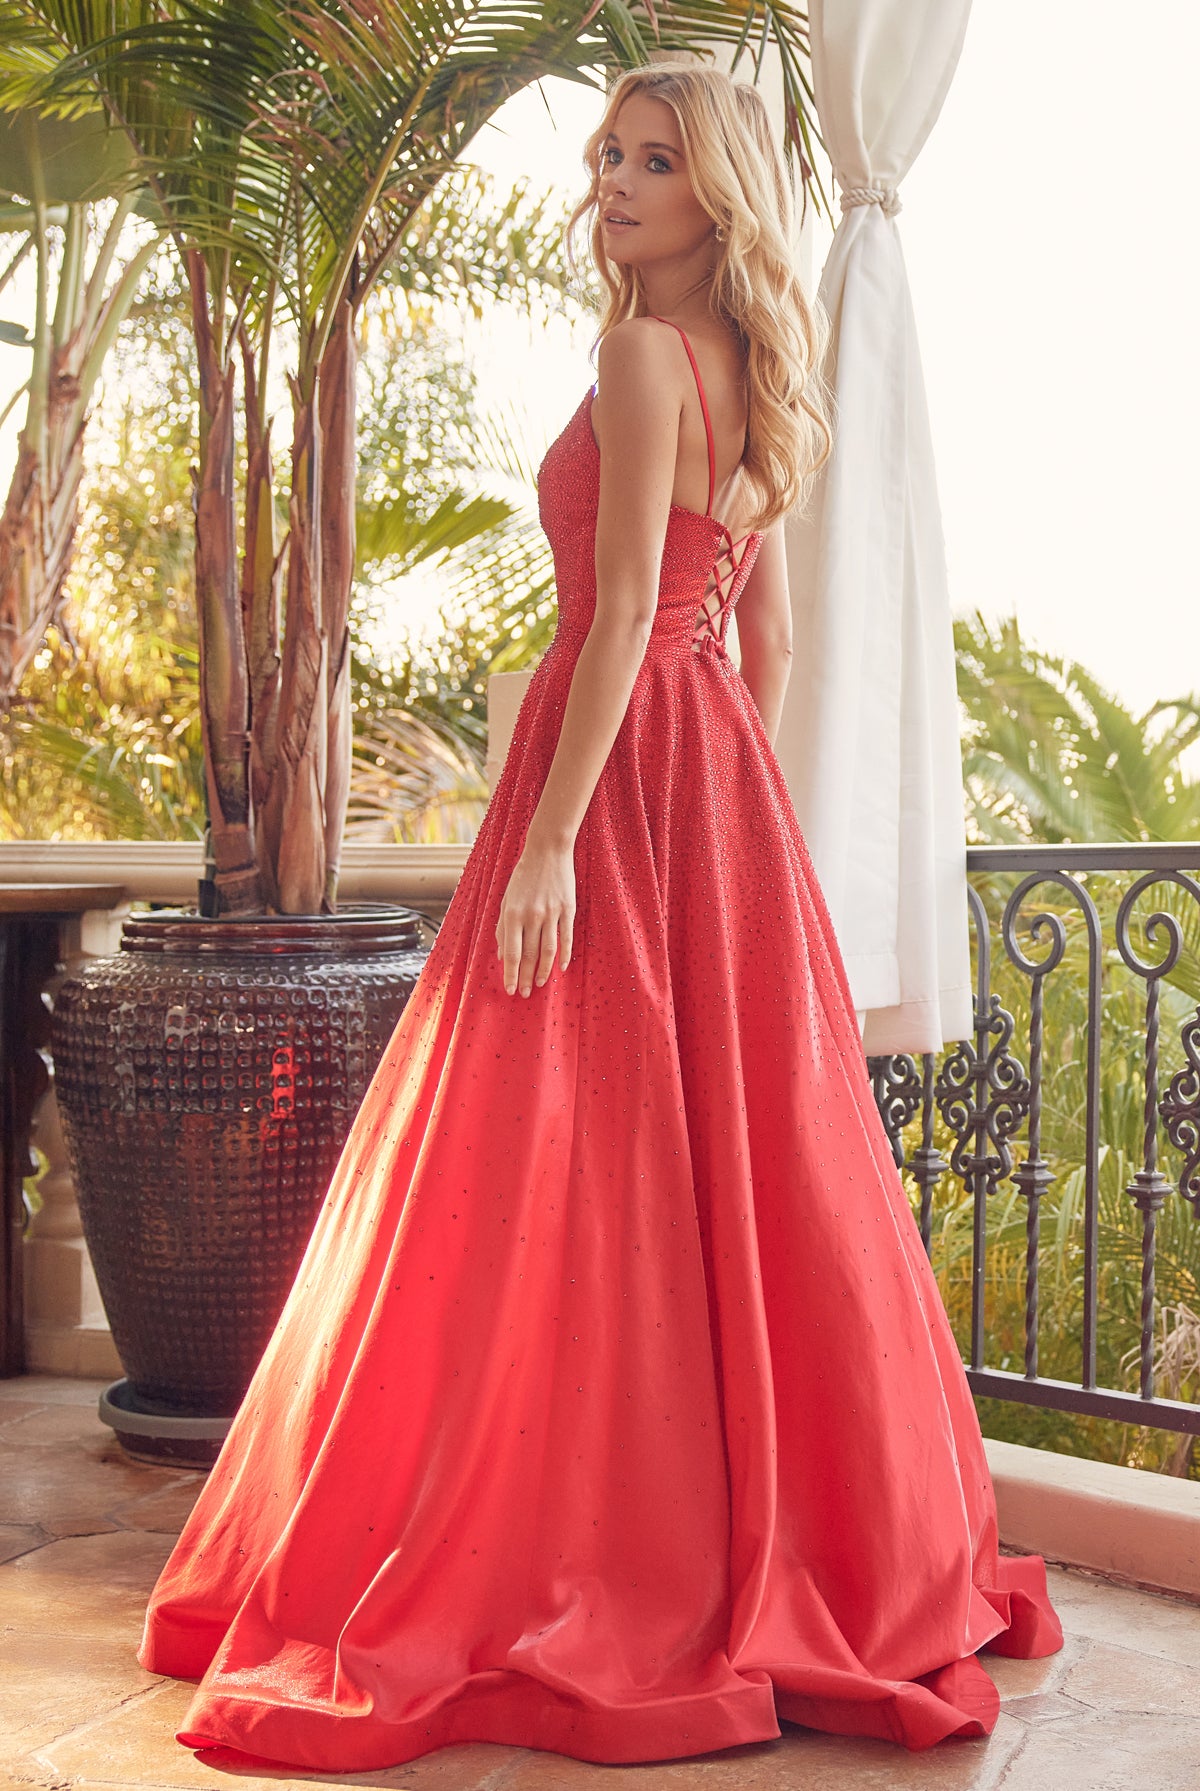 Red prom gown with stone accents alternative